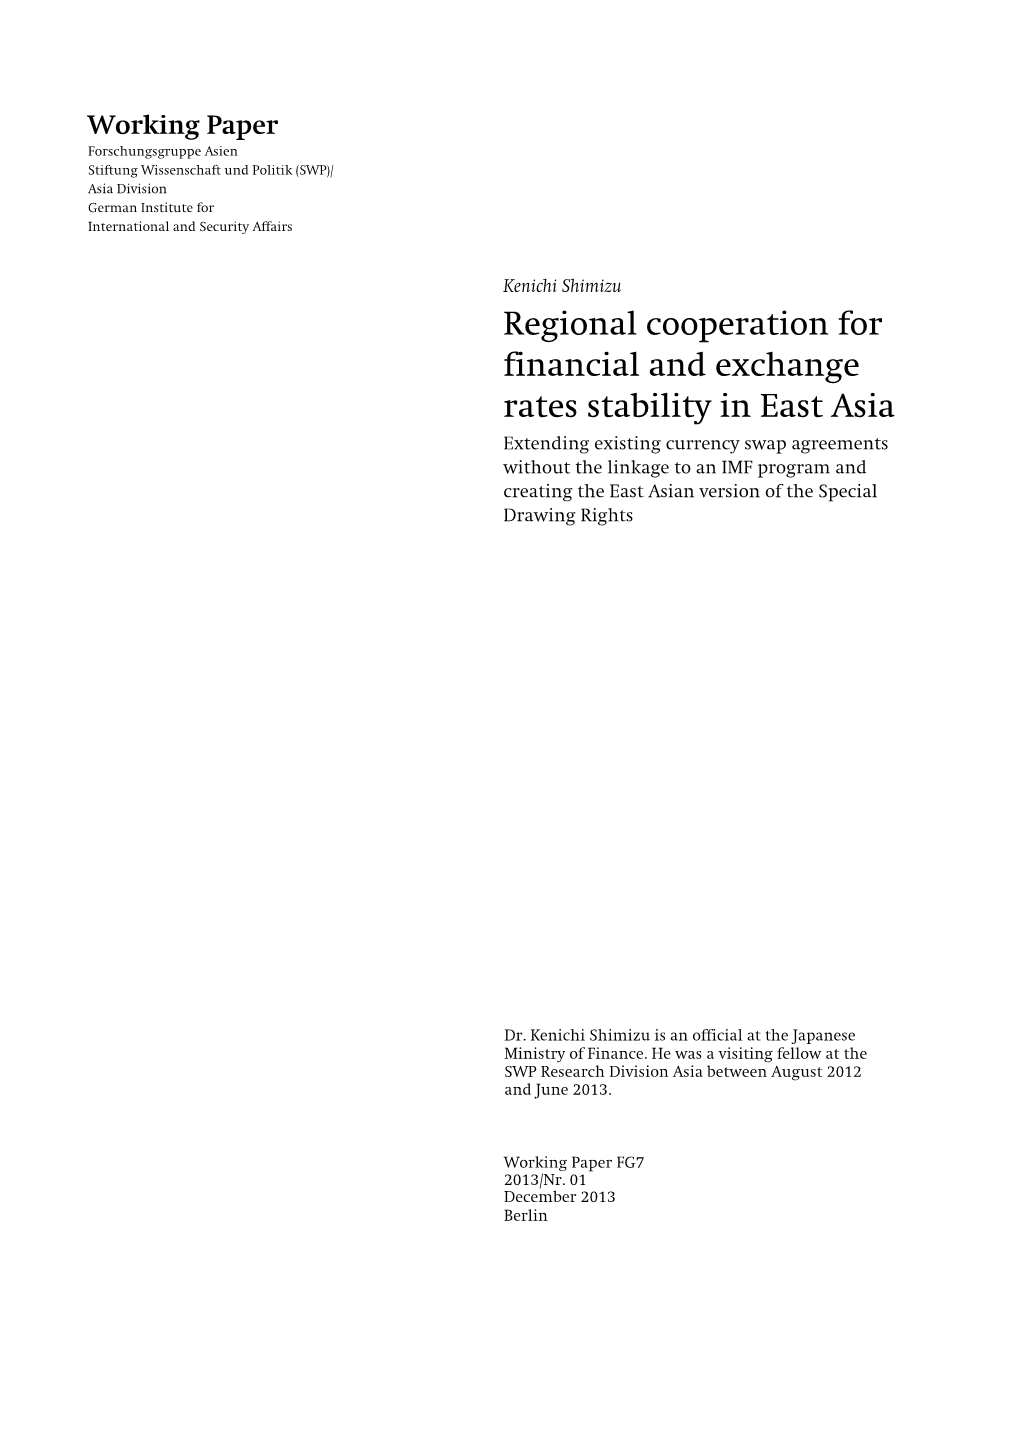 Regional Cooperation for Financial and Exchange Rates Stability in East Asia December 2013